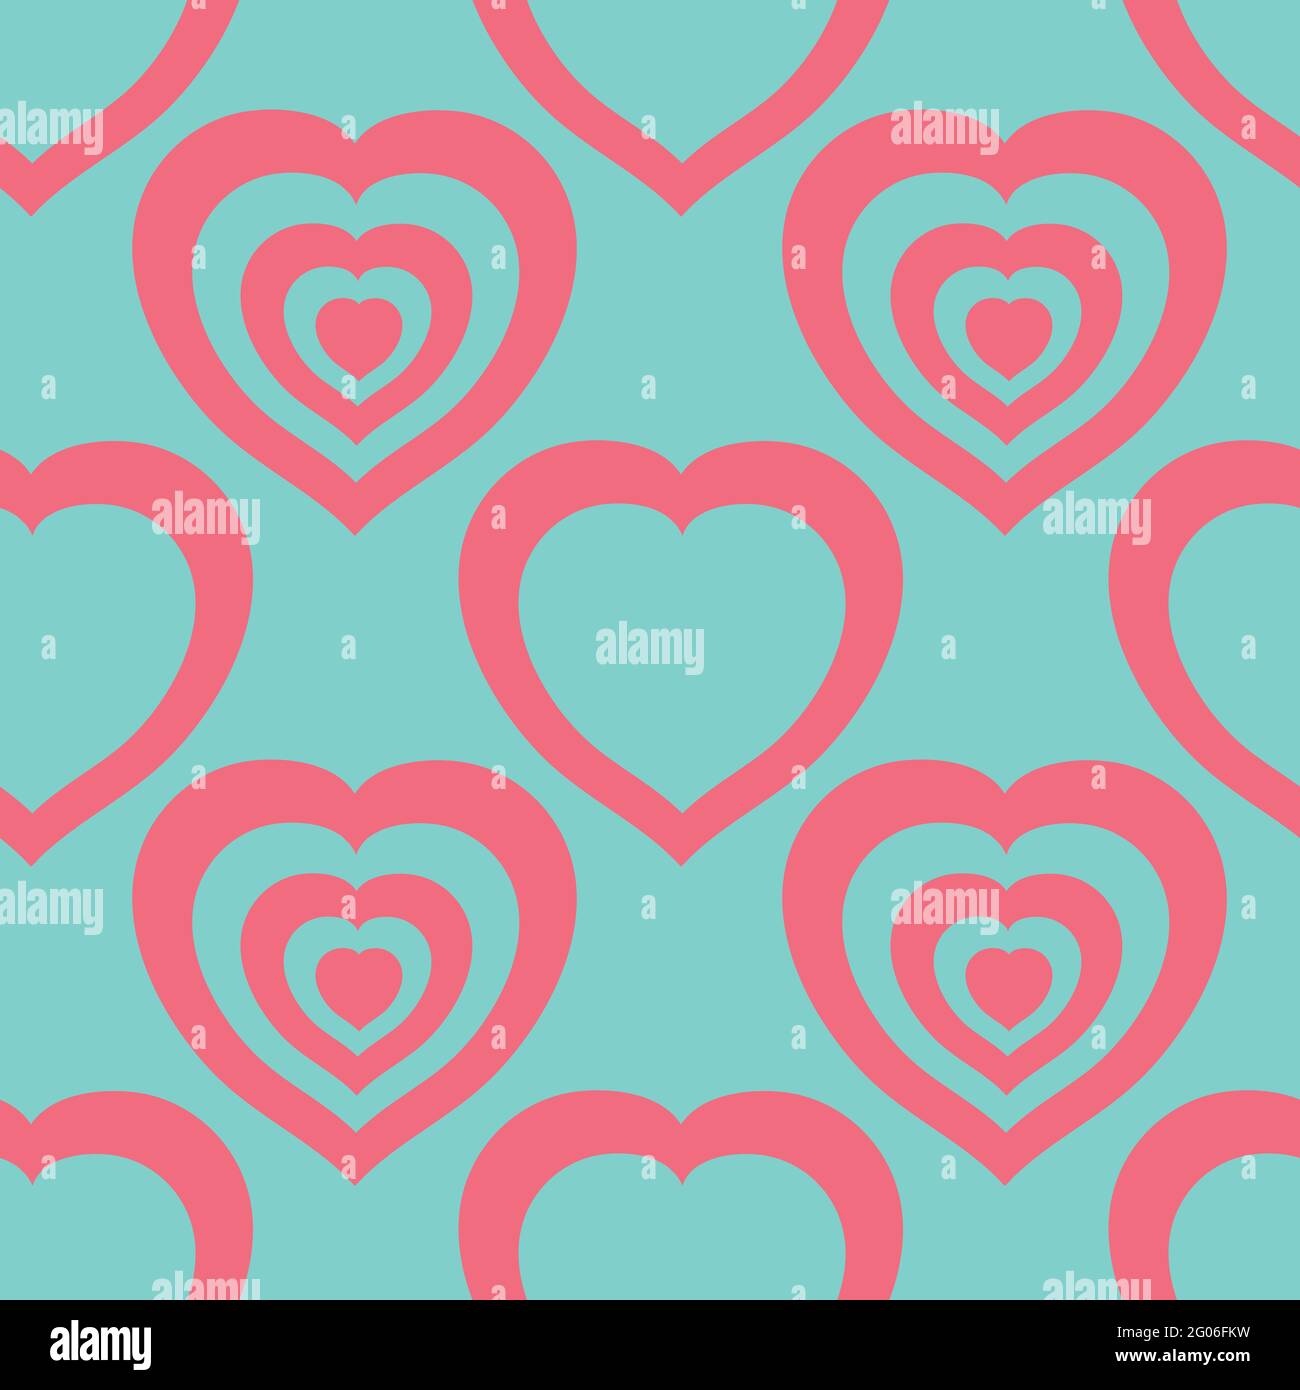 love, heart shape pink color vector Stock Vector